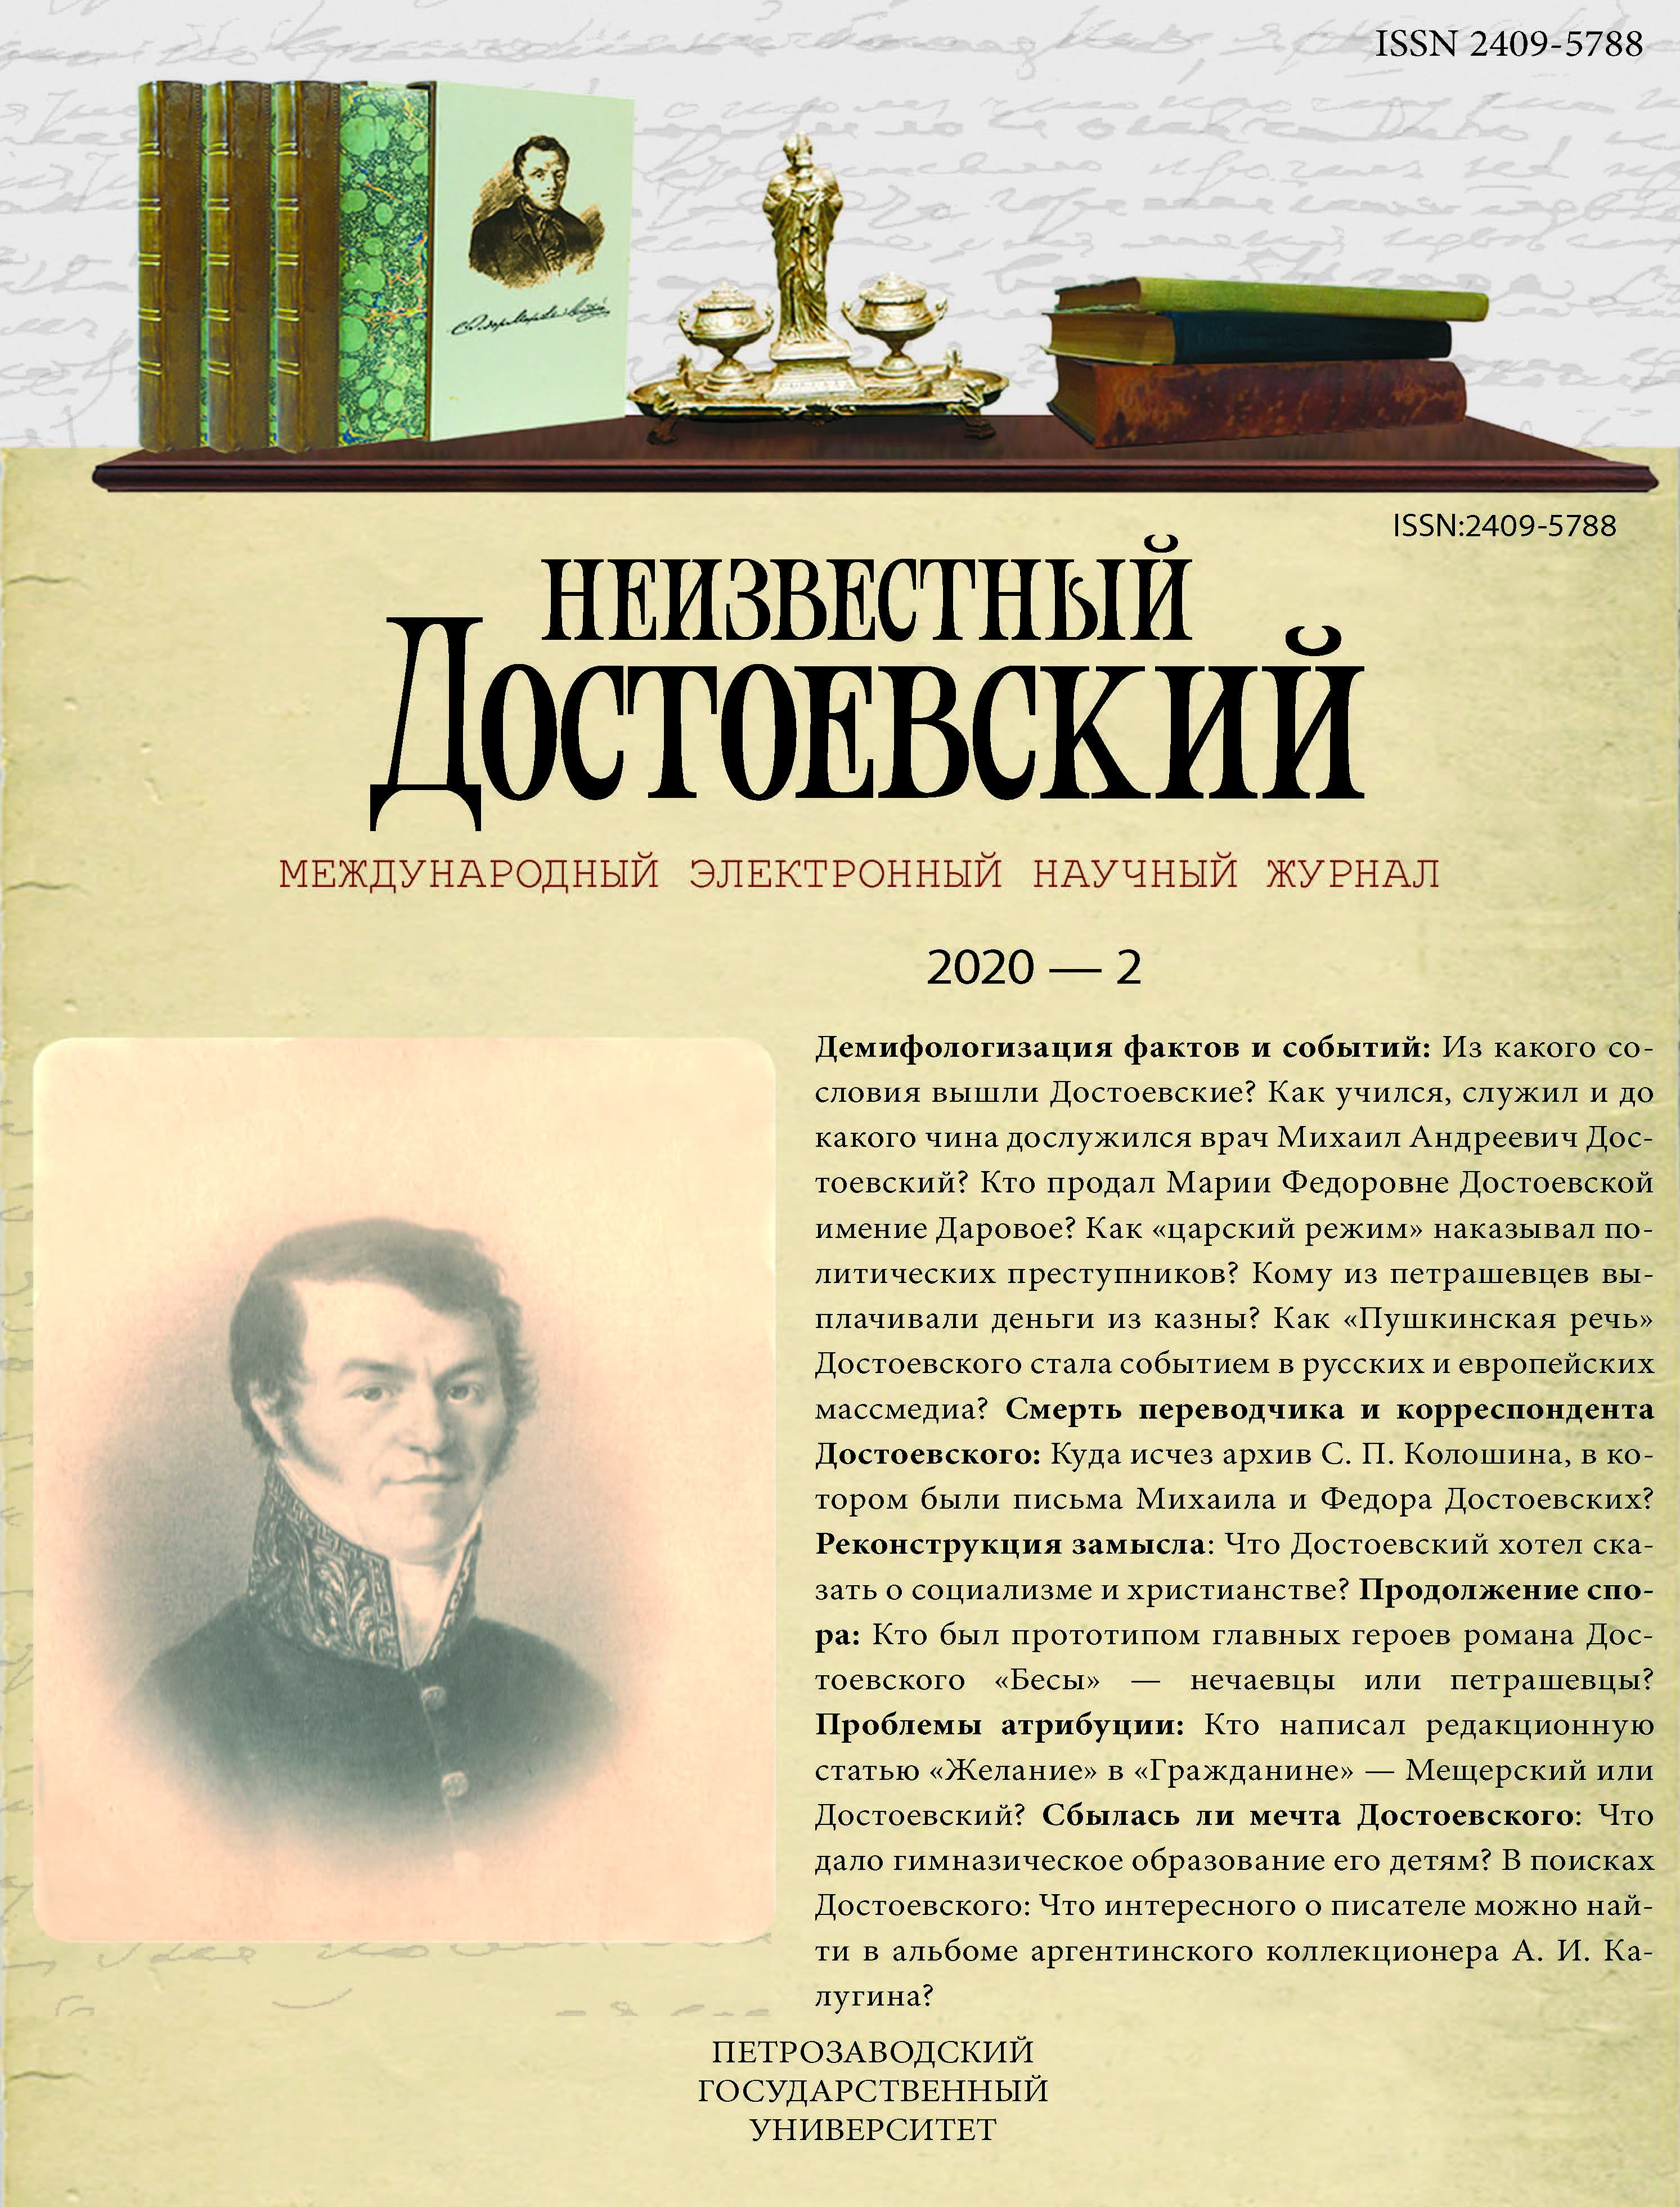 Dismissal from Service (Resignation of M. A. Dostoevsky According to Archival Documents of 1837) Cover Image